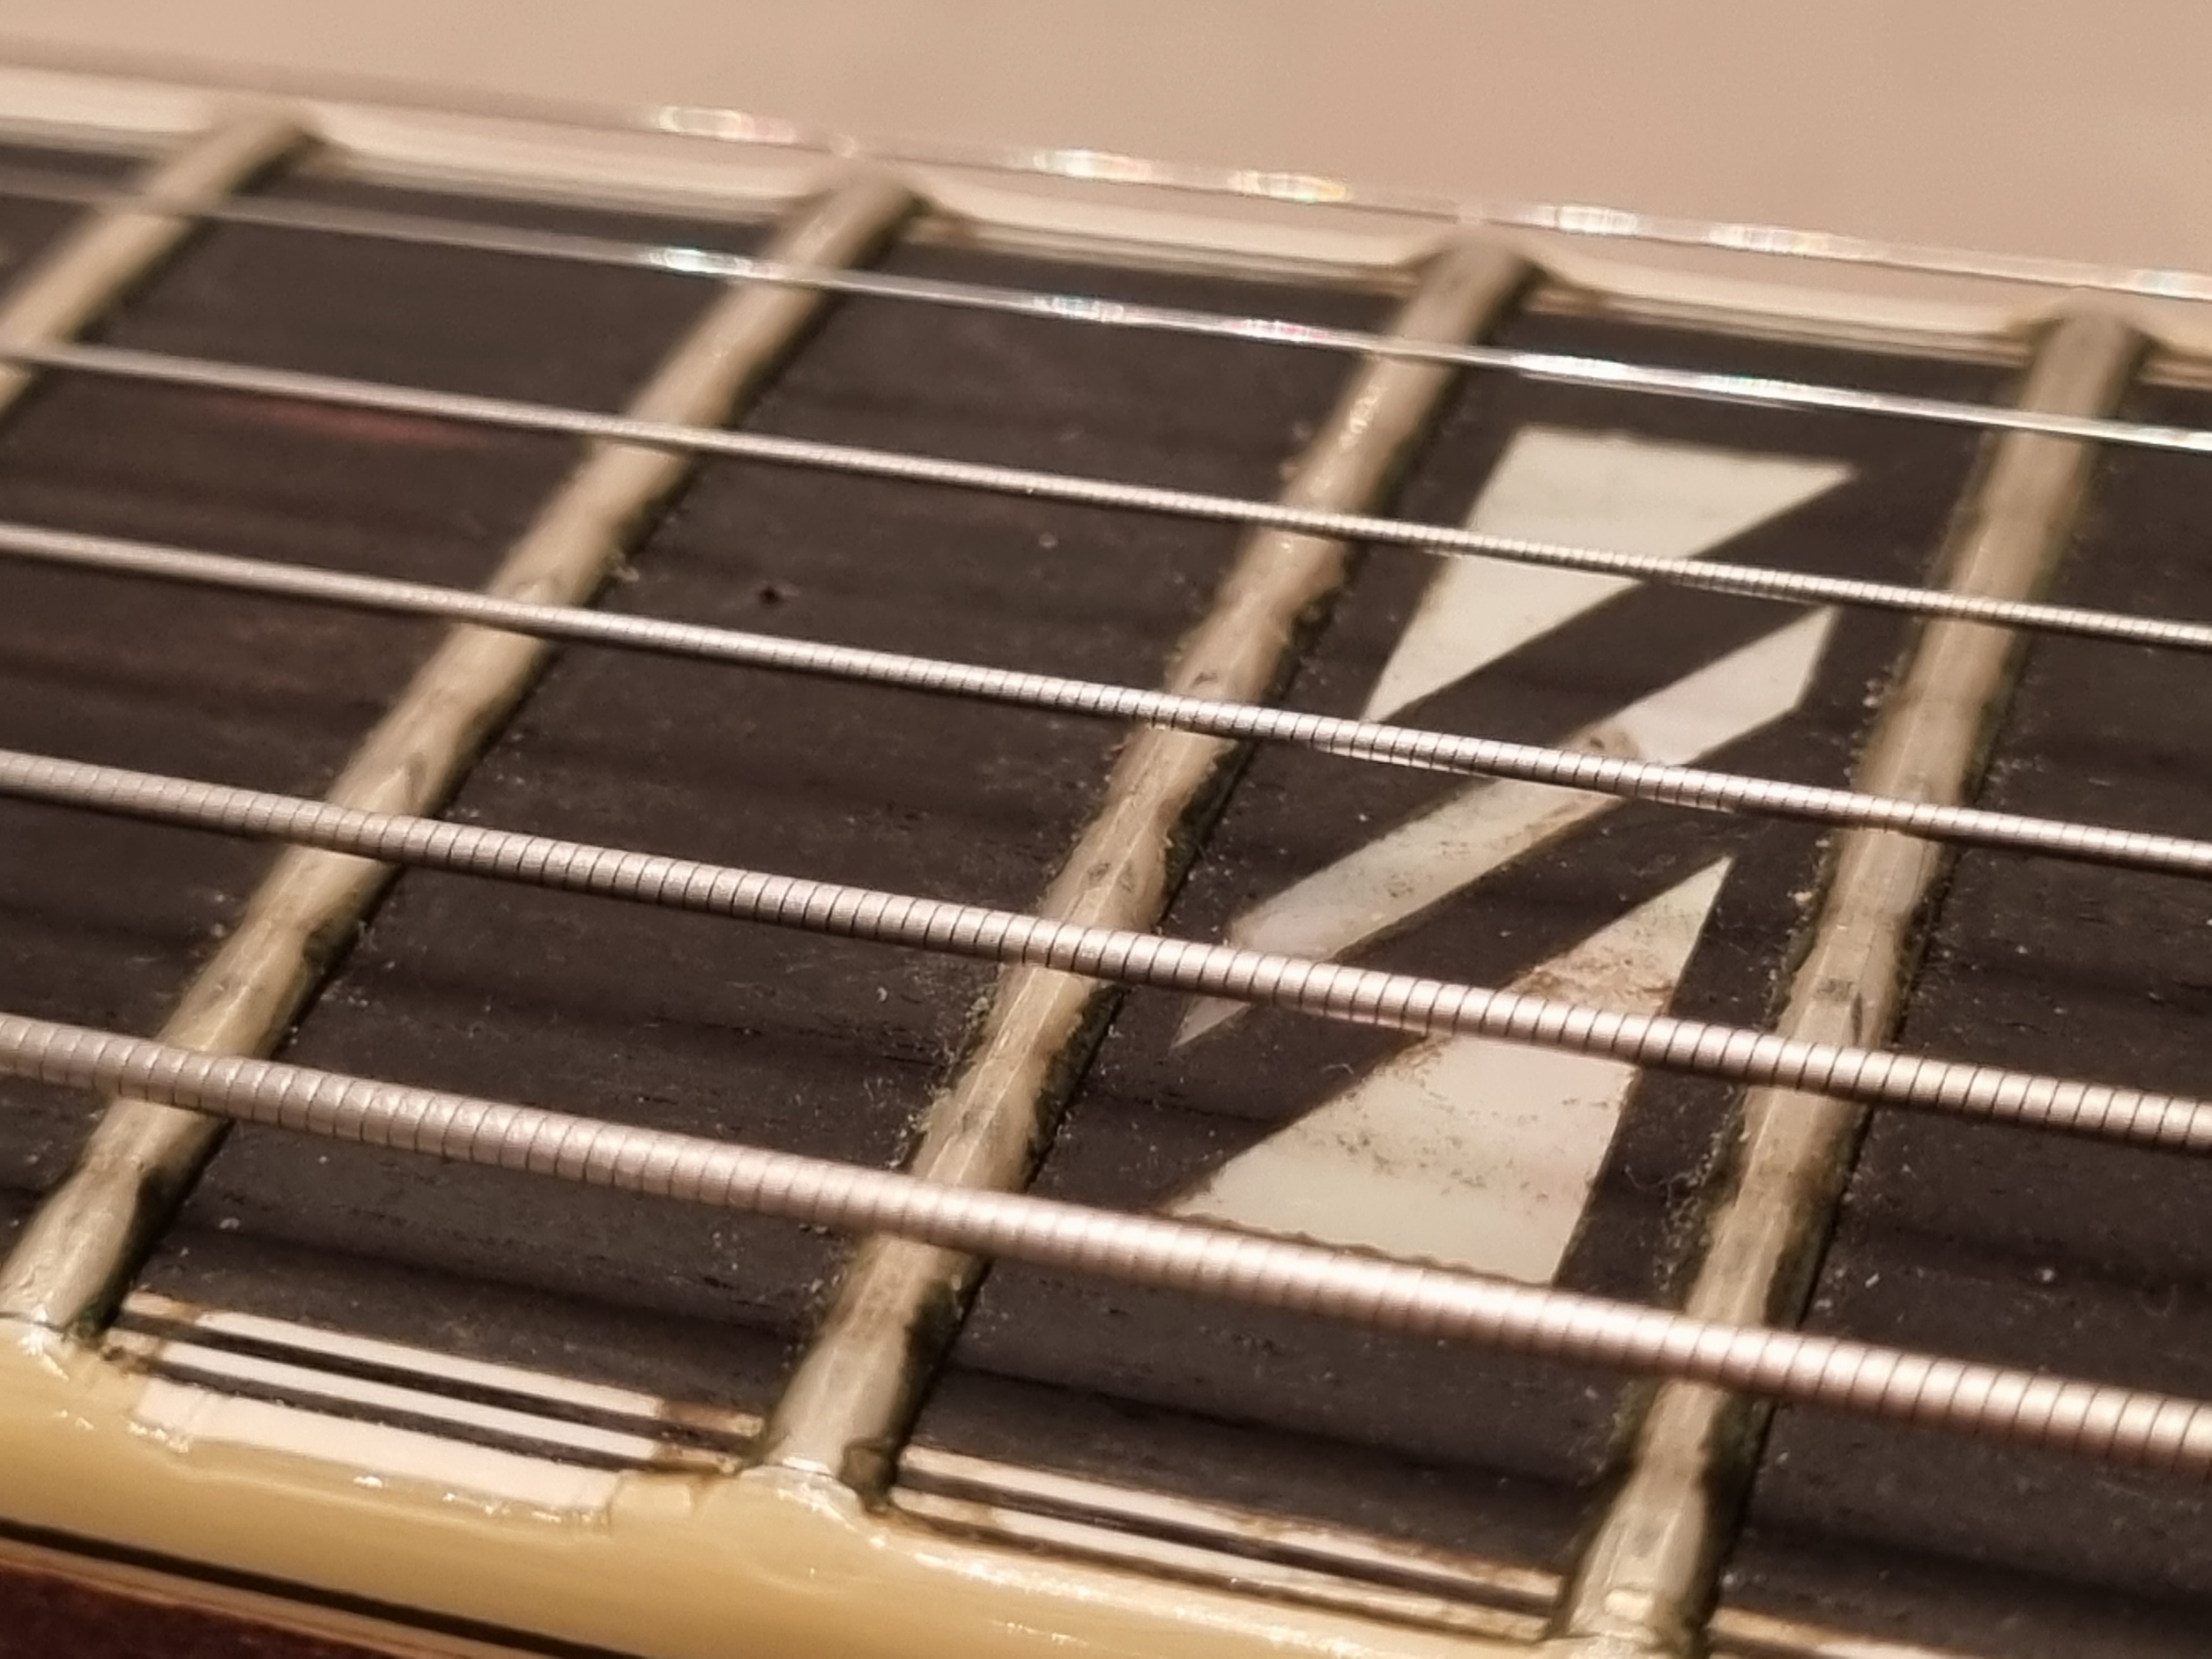 Fretboard pitting - What's the deal?-20210913_201343-jpg